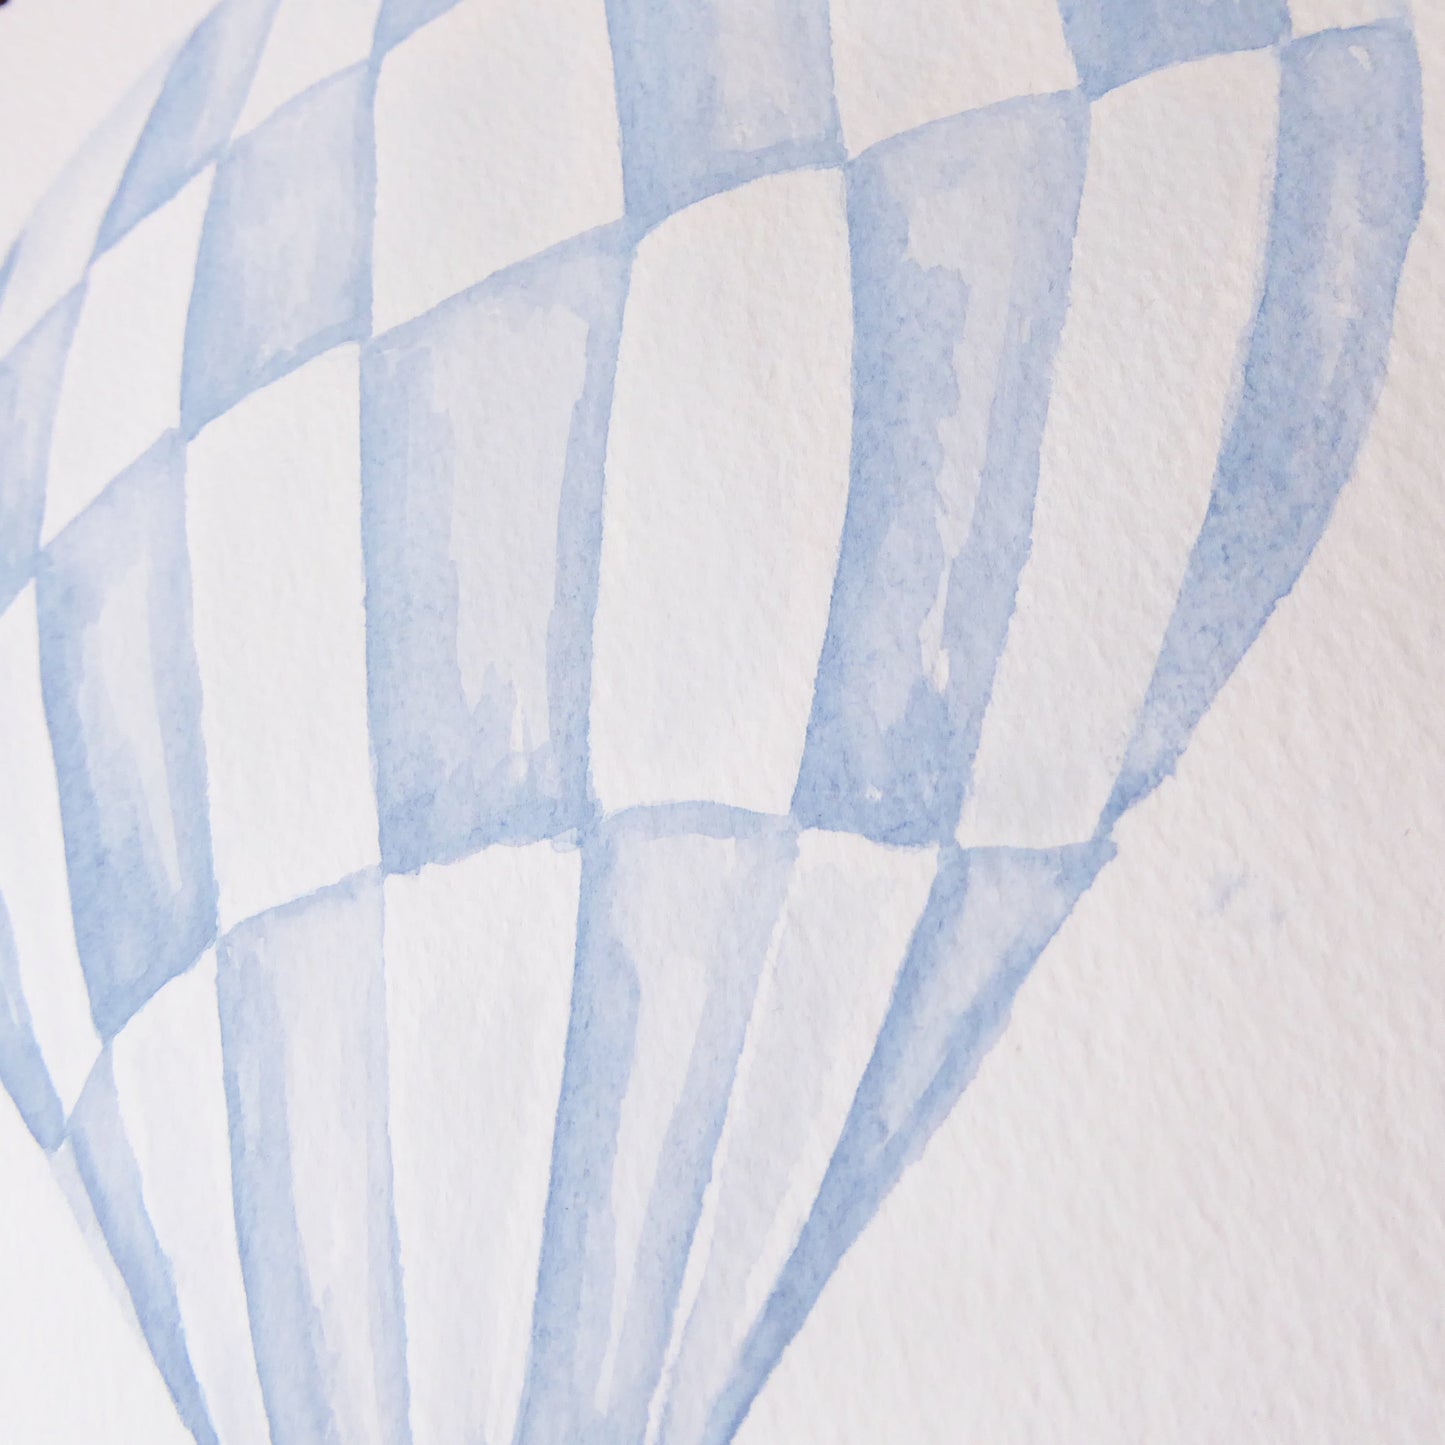 Trio of watercolour hot air balloons | Fabric wall stickers - Adnil Creations